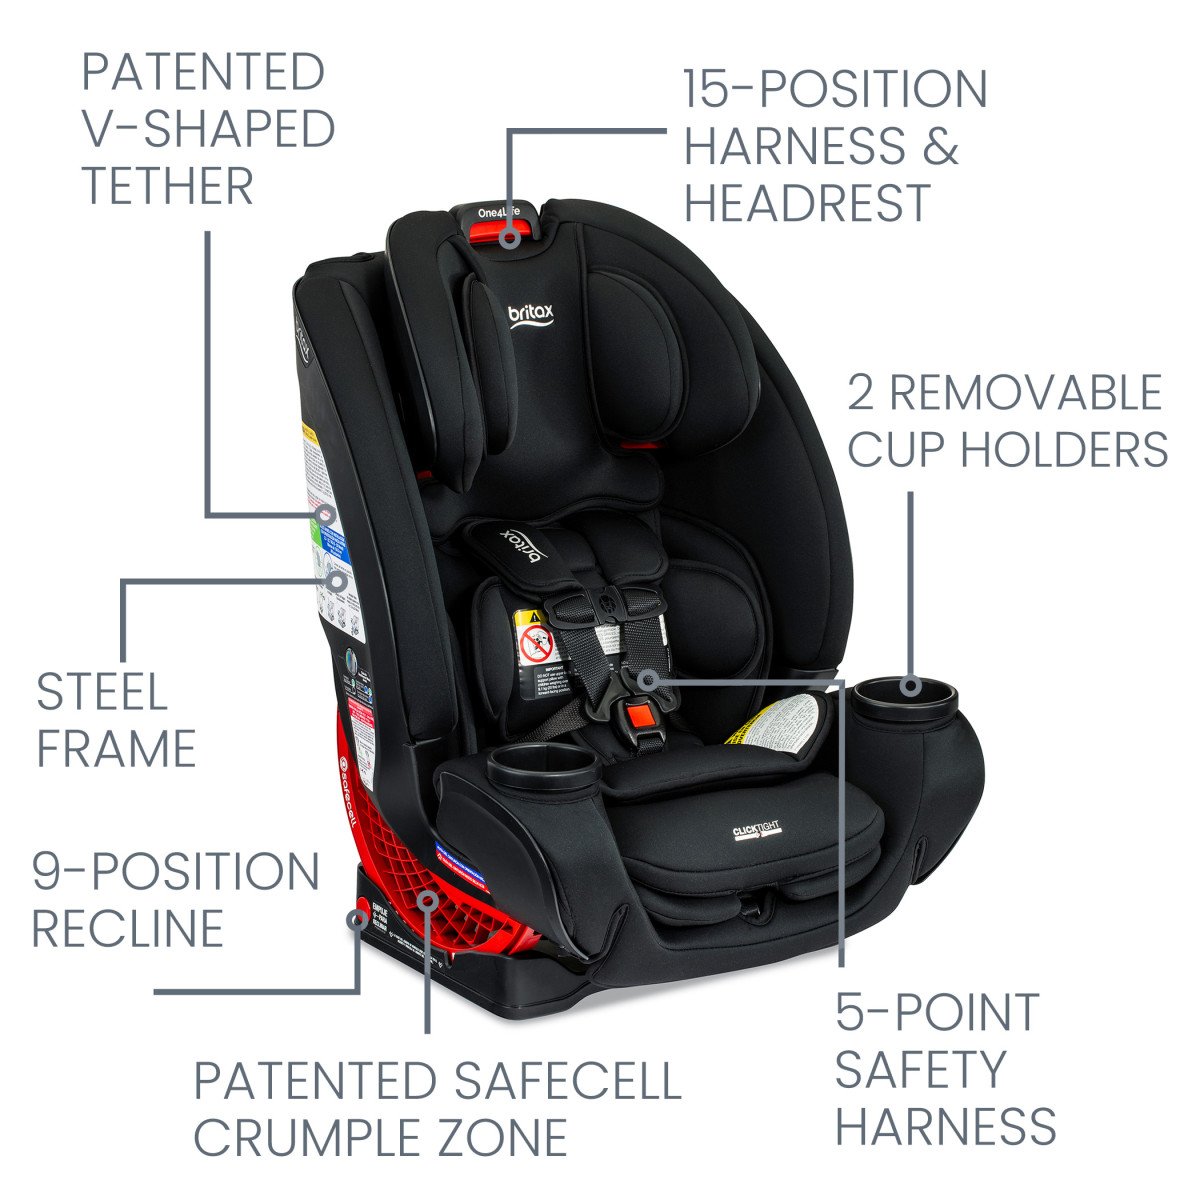  One4Life Onyx Car Seat with Key Features Labeled